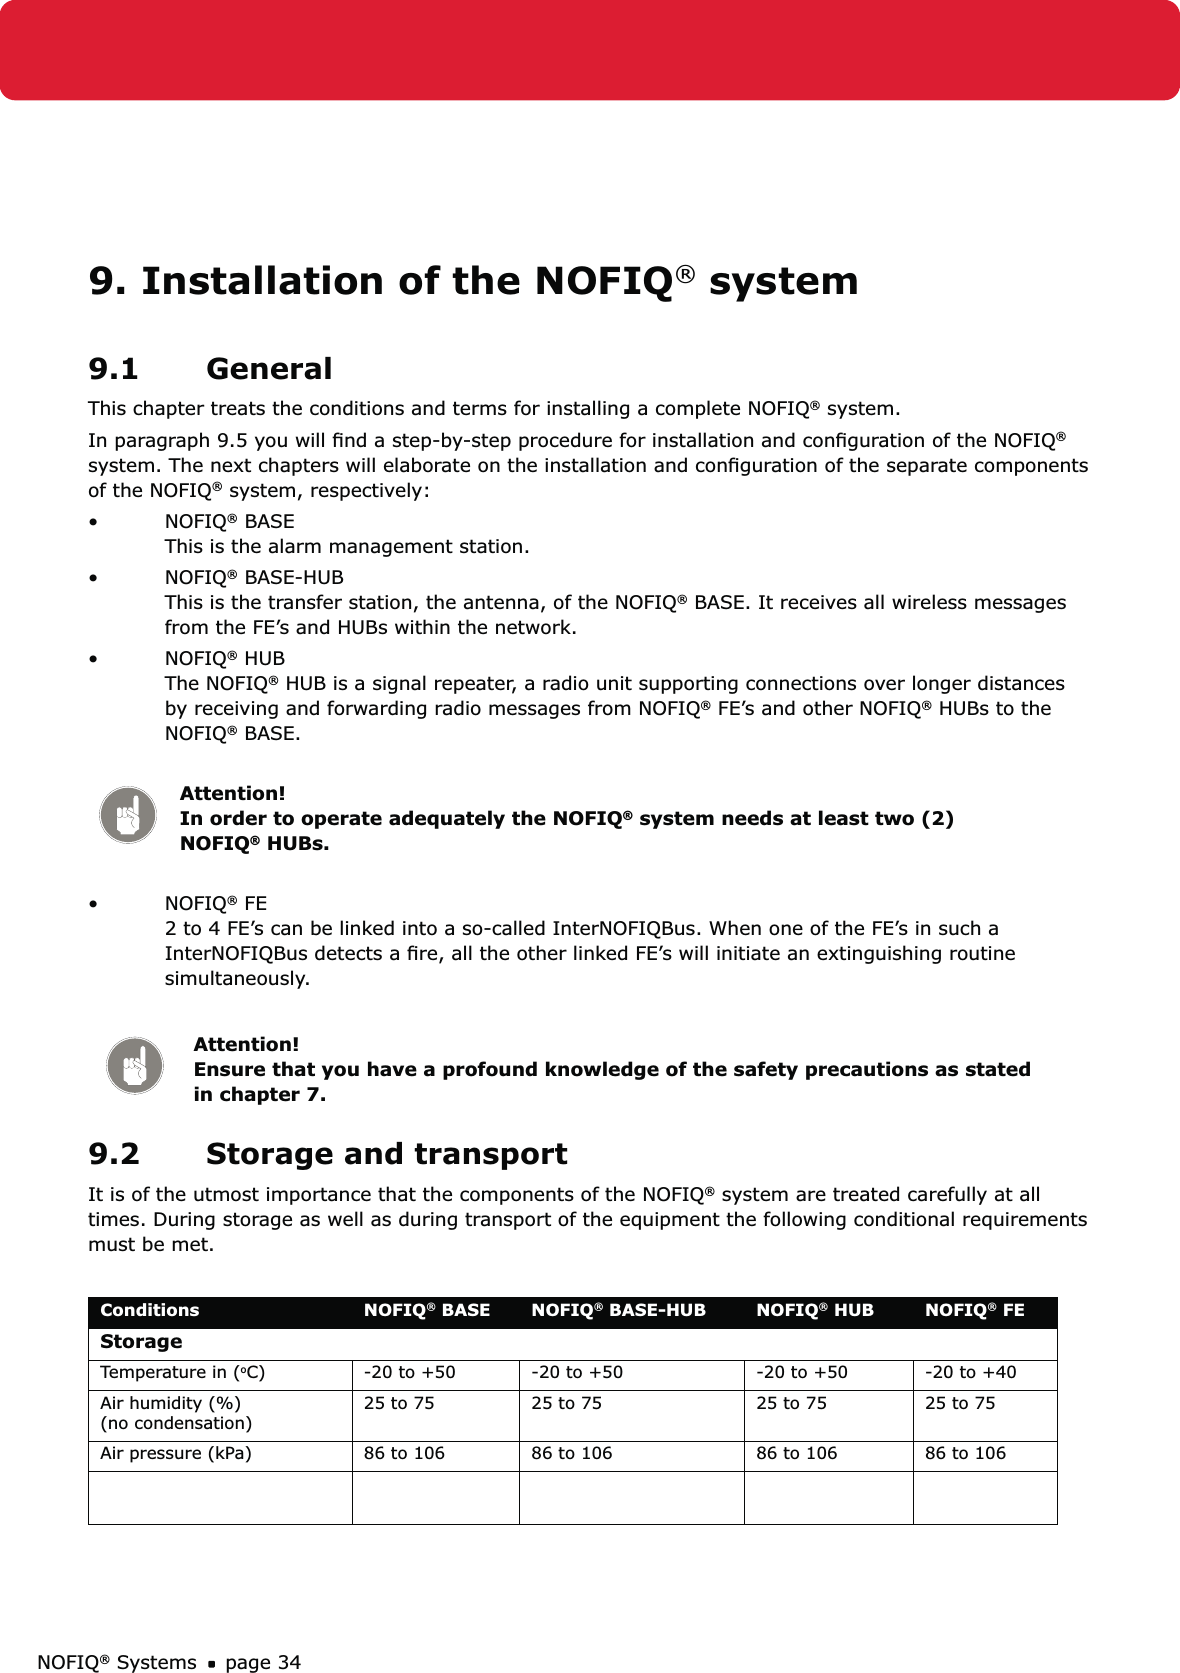 NOFIQ® Systems page 349. Installation of the NOFIQ® system9.1 GeneralThis chapter treats the conditions and terms for installing a complete NOFIQ® system.In paragraph 9.5 you will ﬁnd a step-by-step procedure for installation and conﬁguration of the NOFIQ® system. The next chapters will elaborate on the installation and conﬁguration of the separate components of the NOFIQ® system, respectively:NOFIQ•  ® BASE This is the alarm management station.NOFIQ•  ® BASE-HUB  This is the transfer station, the antenna, of the NOFIQ® BASE. It receives all wireless messages from the FE’s and HUBs within the network.NOFIQ•  ® HUB  The NOFIQ® HUB is a signal repeater, a radio unit supporting connections over longer distances by receiving and forwarding radio messages from NOFIQ® FE’s and other NOFIQ® HUBs to the NOFIQ® BASE.  Attention! In order to operate adequately the NOFIQ® system needs at least two (2) NOFIQ® HUBs.NOFIQ•  ® FE  2 to 4 FE’s can be linked into a so-called InterNOFIQBus. When one of the FE’s in such a InterNOFIQBus detects a ﬁre, all the other linked FE’s will initiate an extinguishing routine simultaneously.Attention! Ensure that you have a profound knowledge of the safety precautions as stated in chapter 7.9.2  Storage and transportIt is of the utmost importance that the components of the NOFIQ® system are treated carefully at all times. During storage as well as during transport of the equipment the following conditional requirements must be met.Conditions NOFIQ® BASE NOFIQ® BASE-HUB NOFIQ® HUB NOFIQ® FEStorageTemperature in (oC) -20 to +50 -20 to +50 -20 to +50 -20 to +40Air humidity (%)  (no condensation)25 to 75 25 to 75 25 to 75 25 to 75Air pressure (kPa) 86 to 106 86 to 106 86 to 106 86 to 106